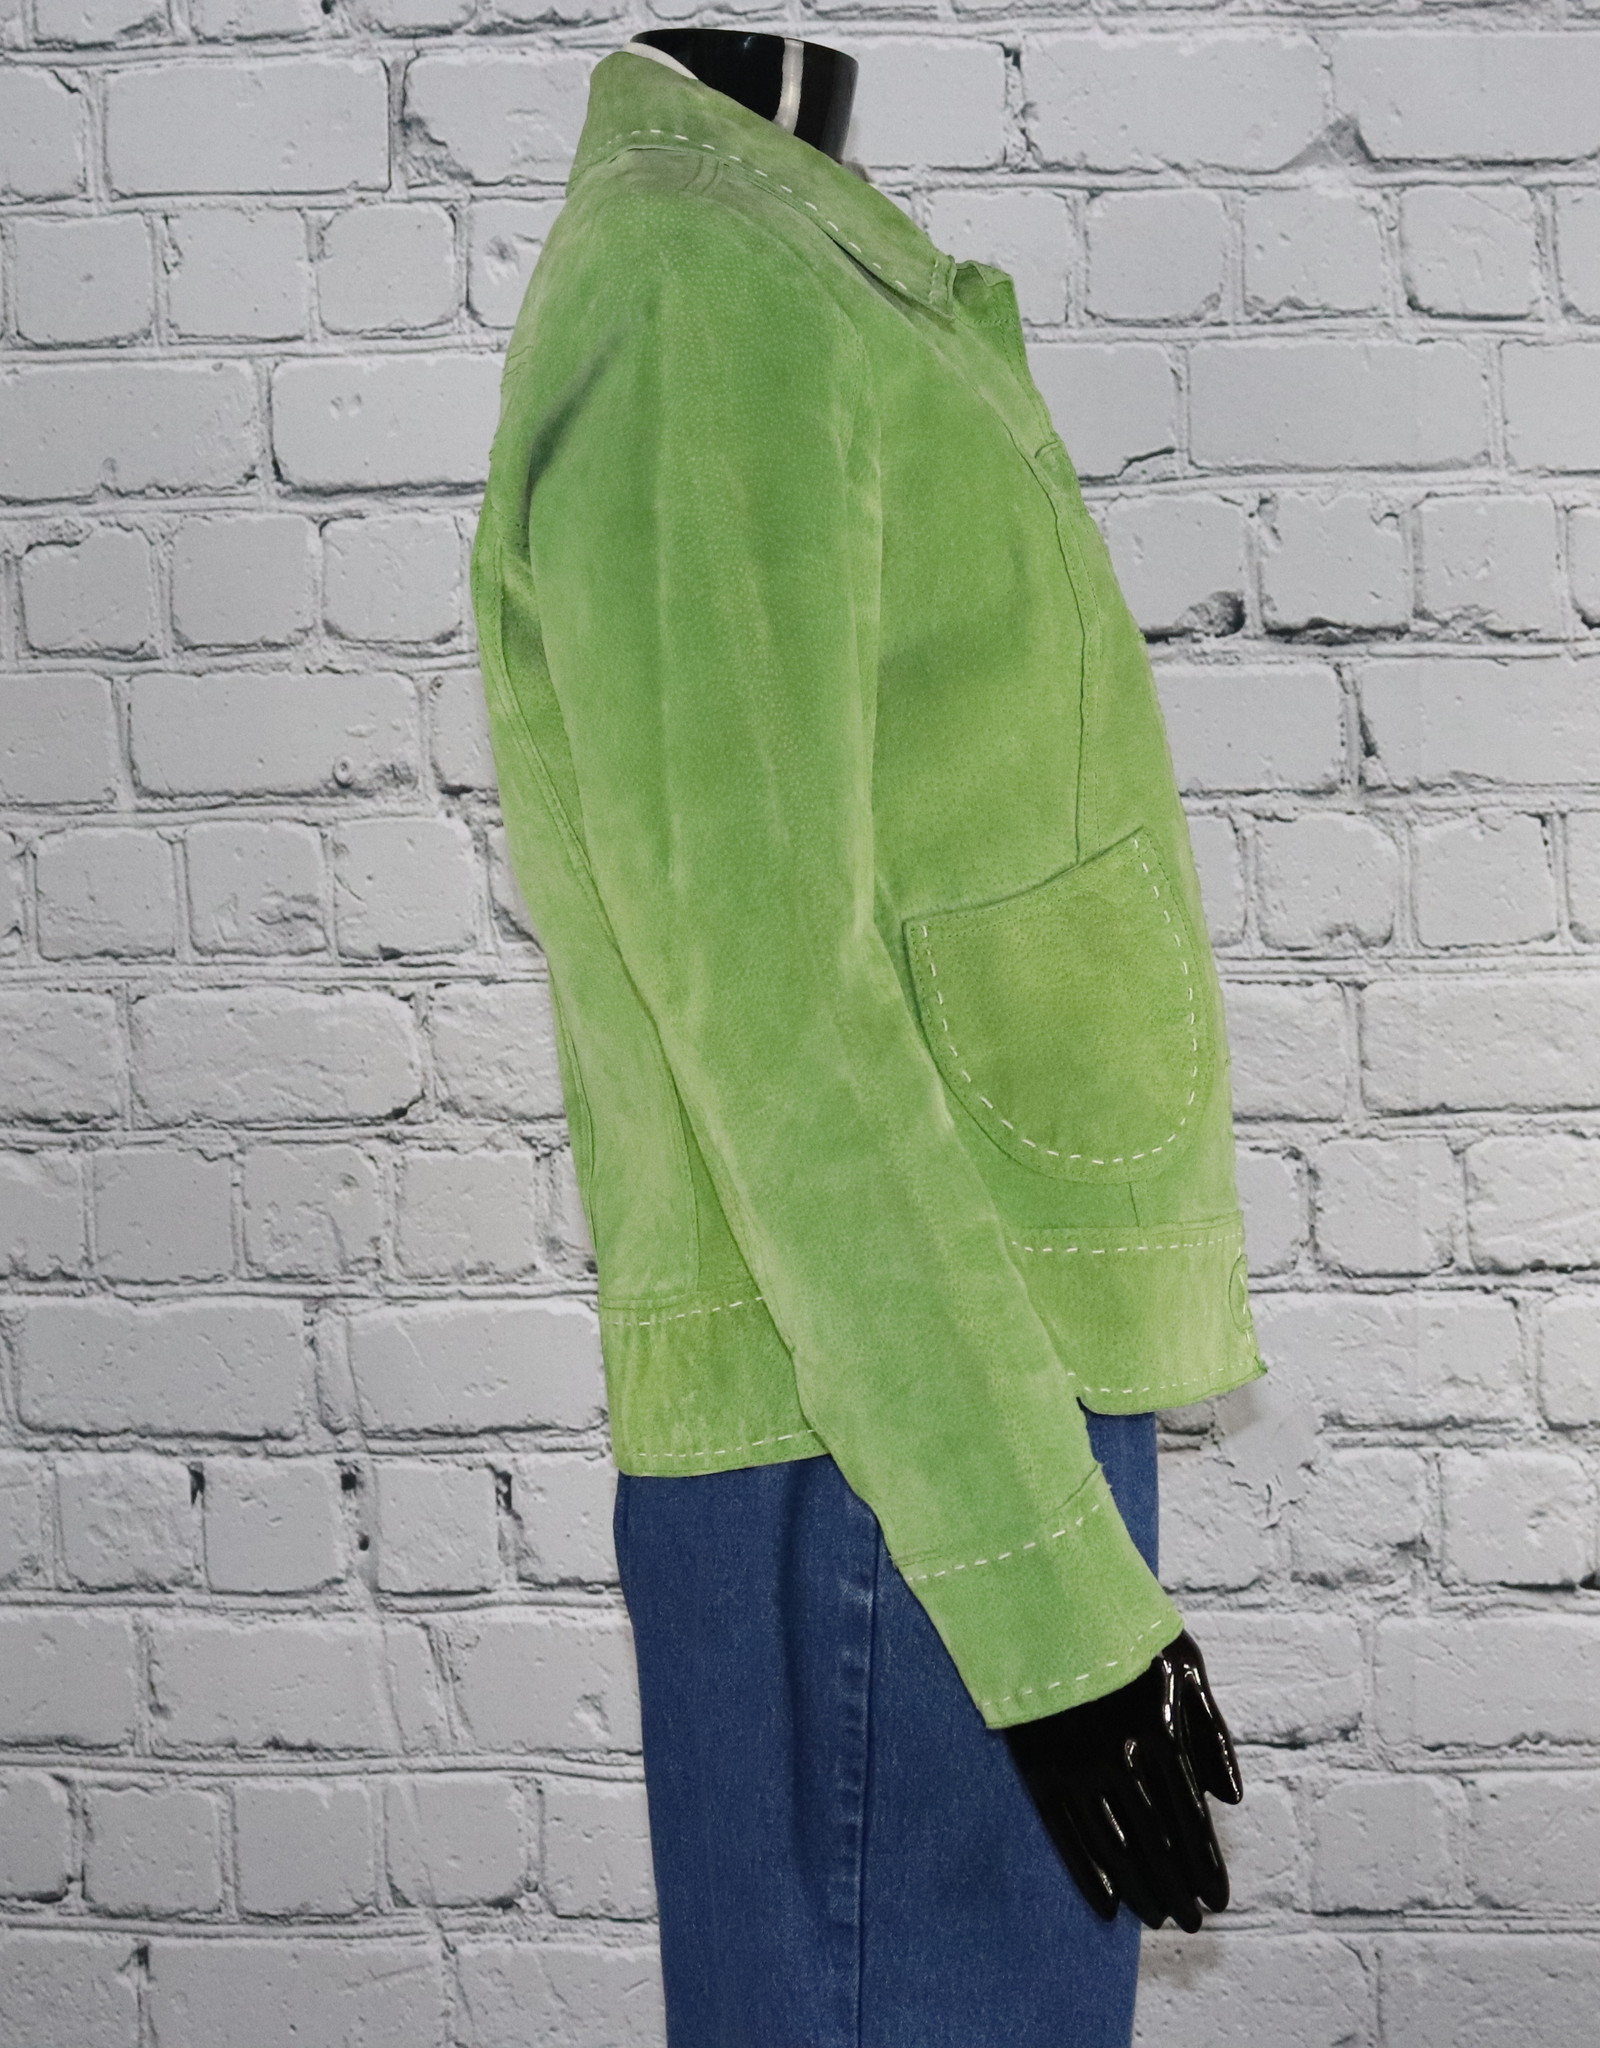 Bamboo Traders: 1970's-1980's Vintage Solid Lime Green Leather Jacket with White Threading for Gals